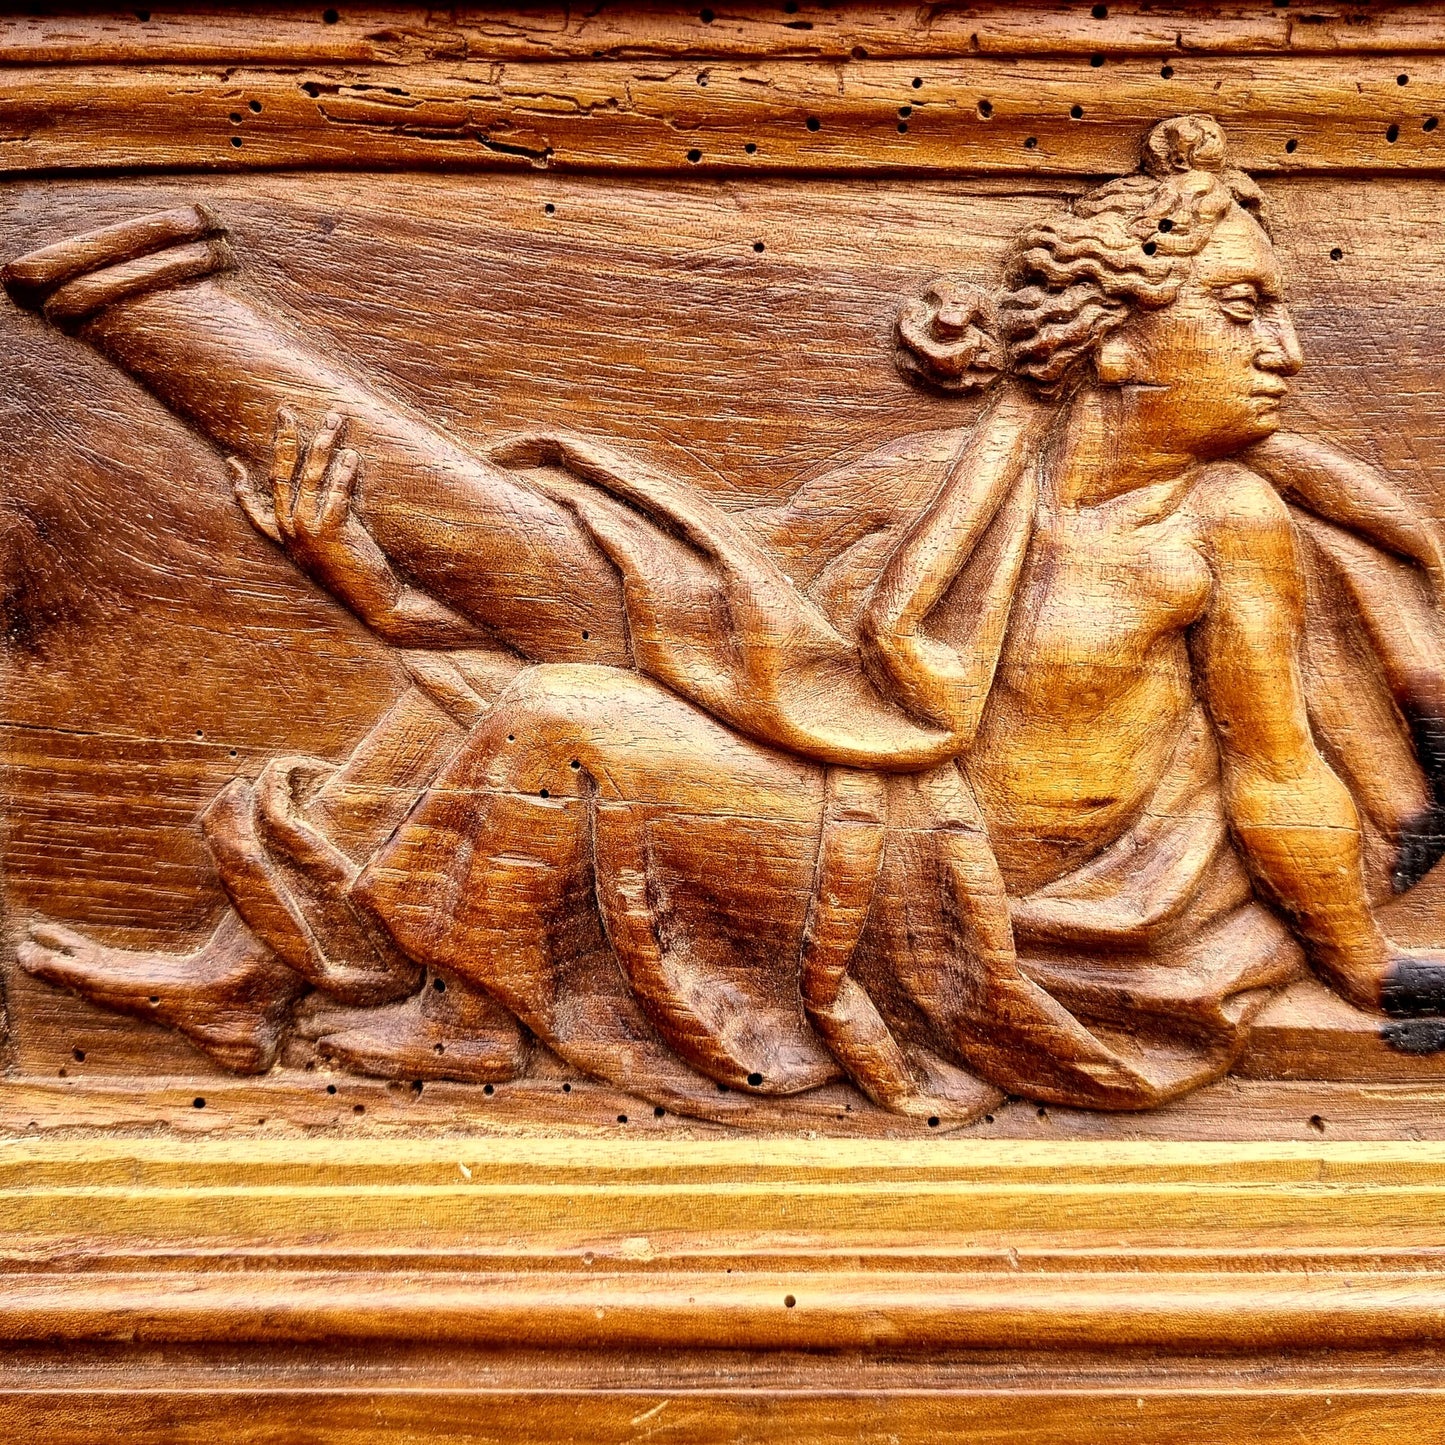 Early 18th Century Flemish Antique Carved Walnut Panel Depicting An Allegory of Fortitude